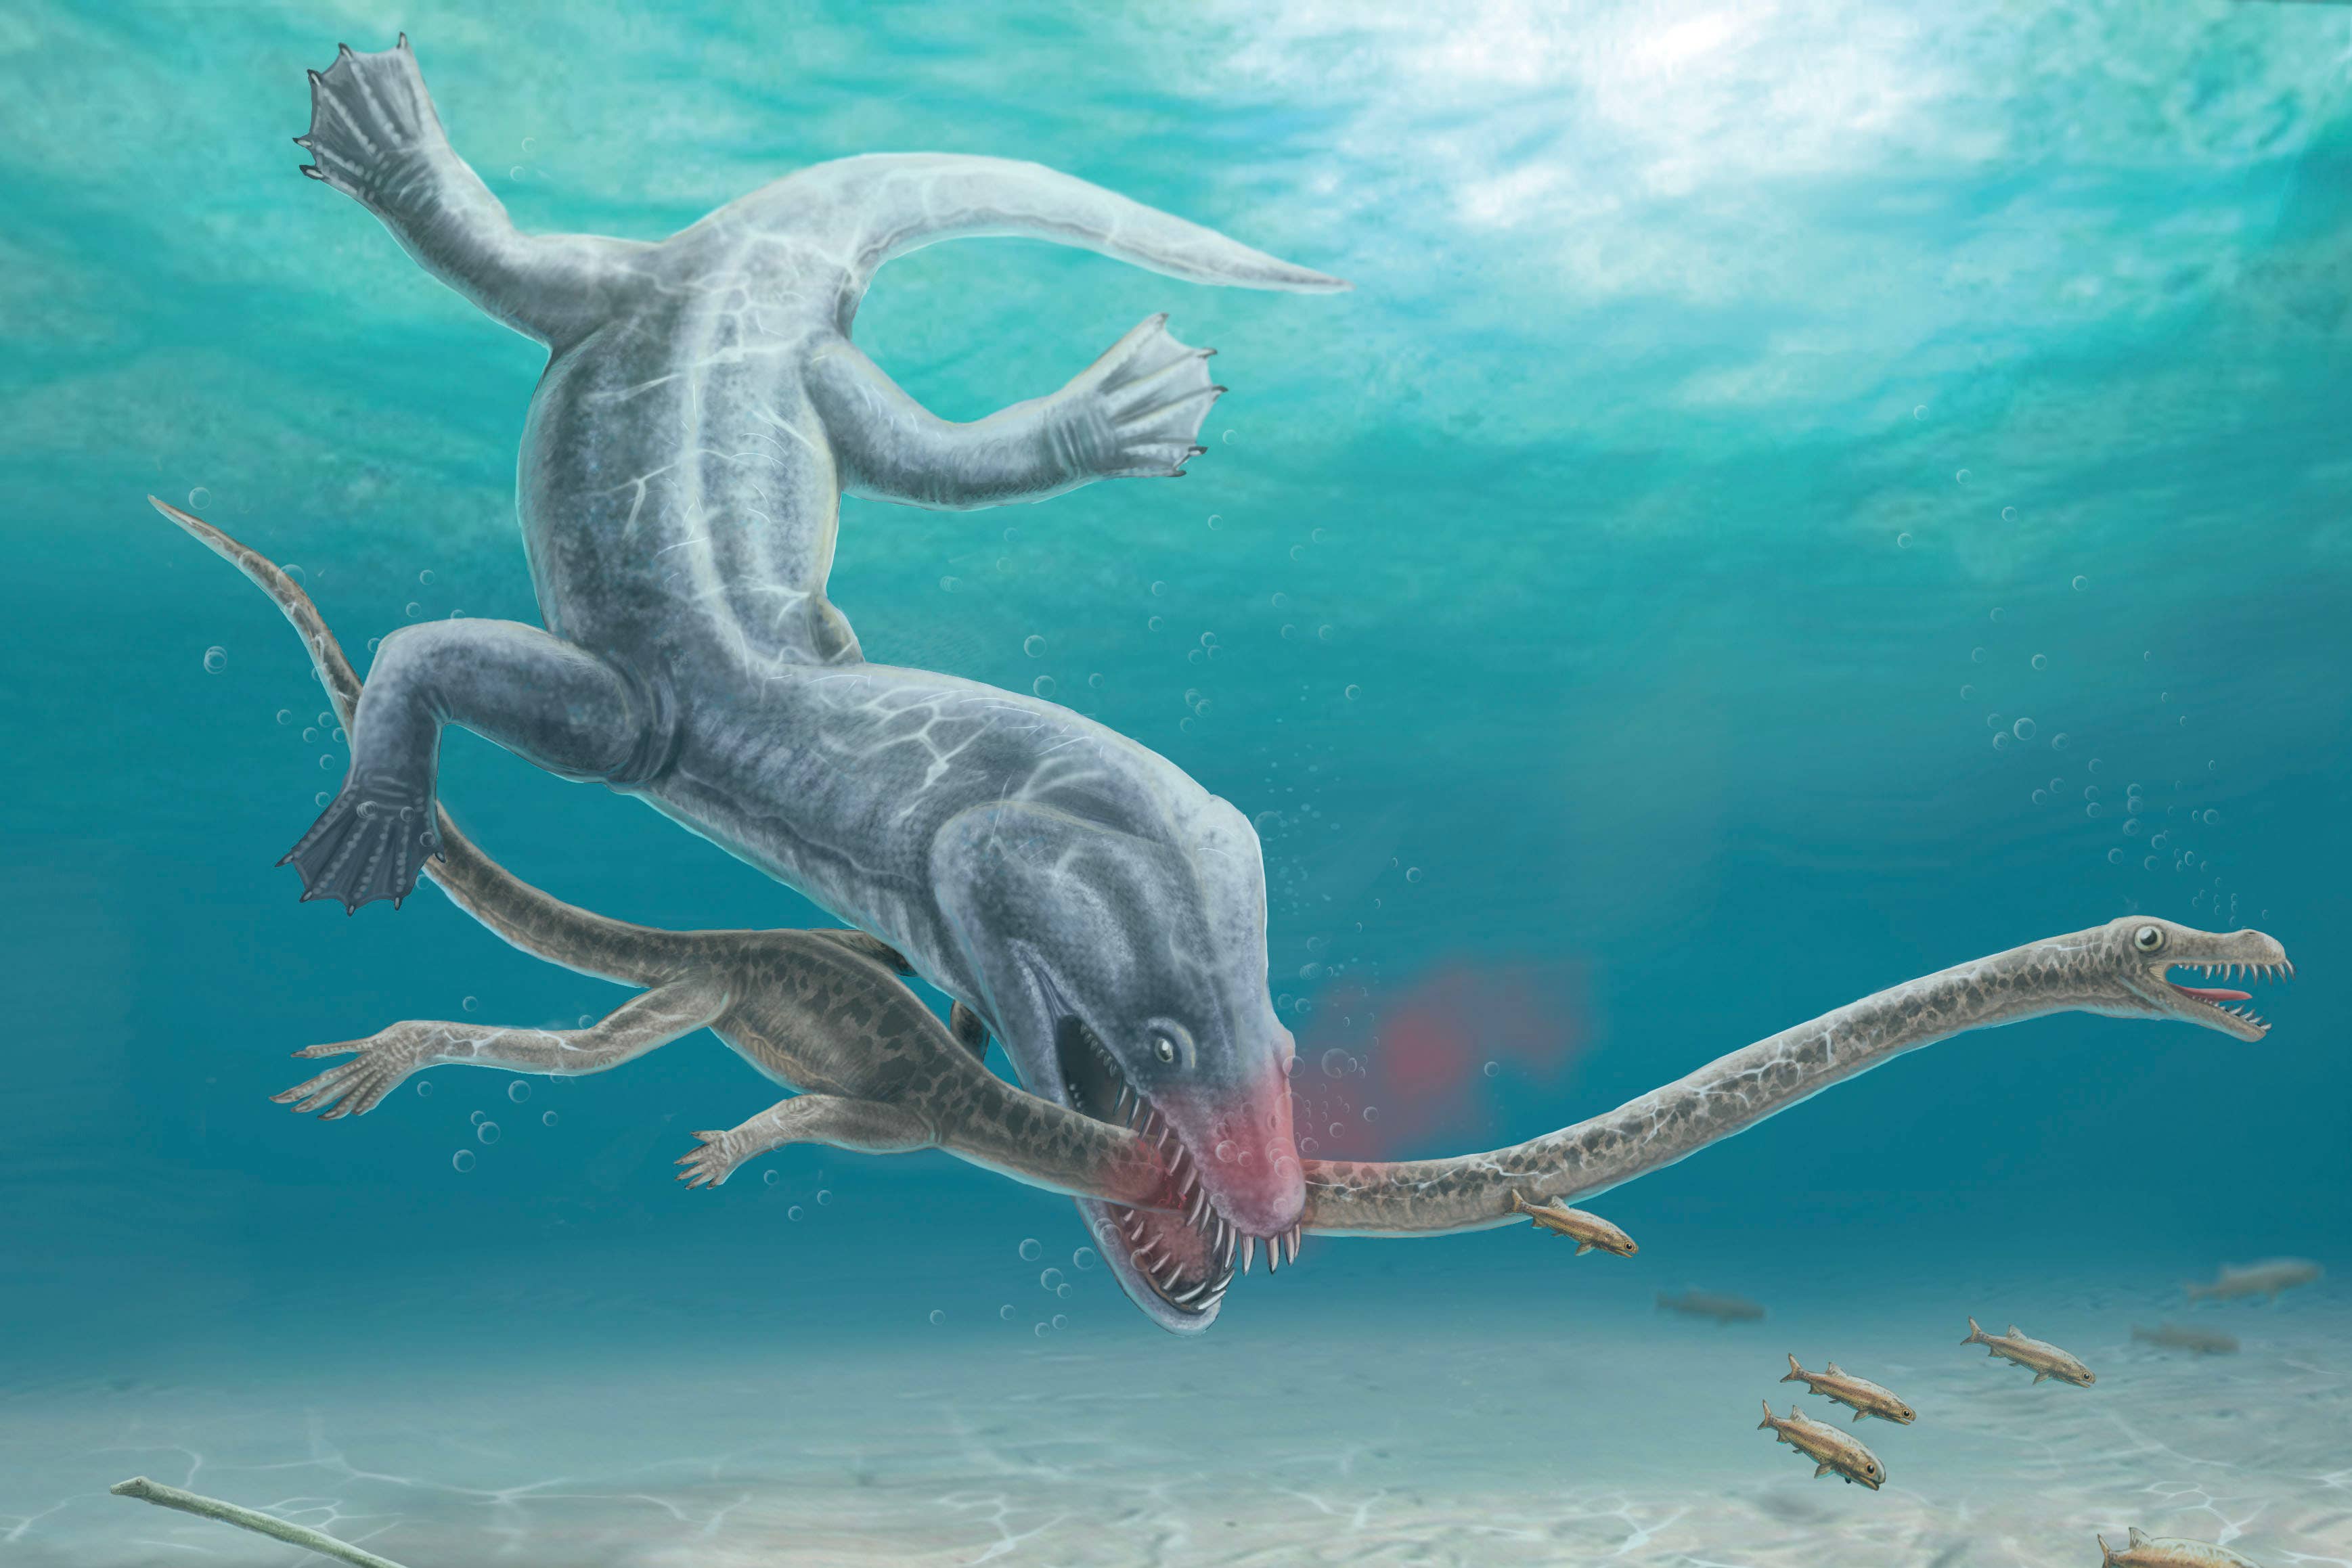 Pre-historic long-necked reptiles were decapitated by their predators –  study | The Independent